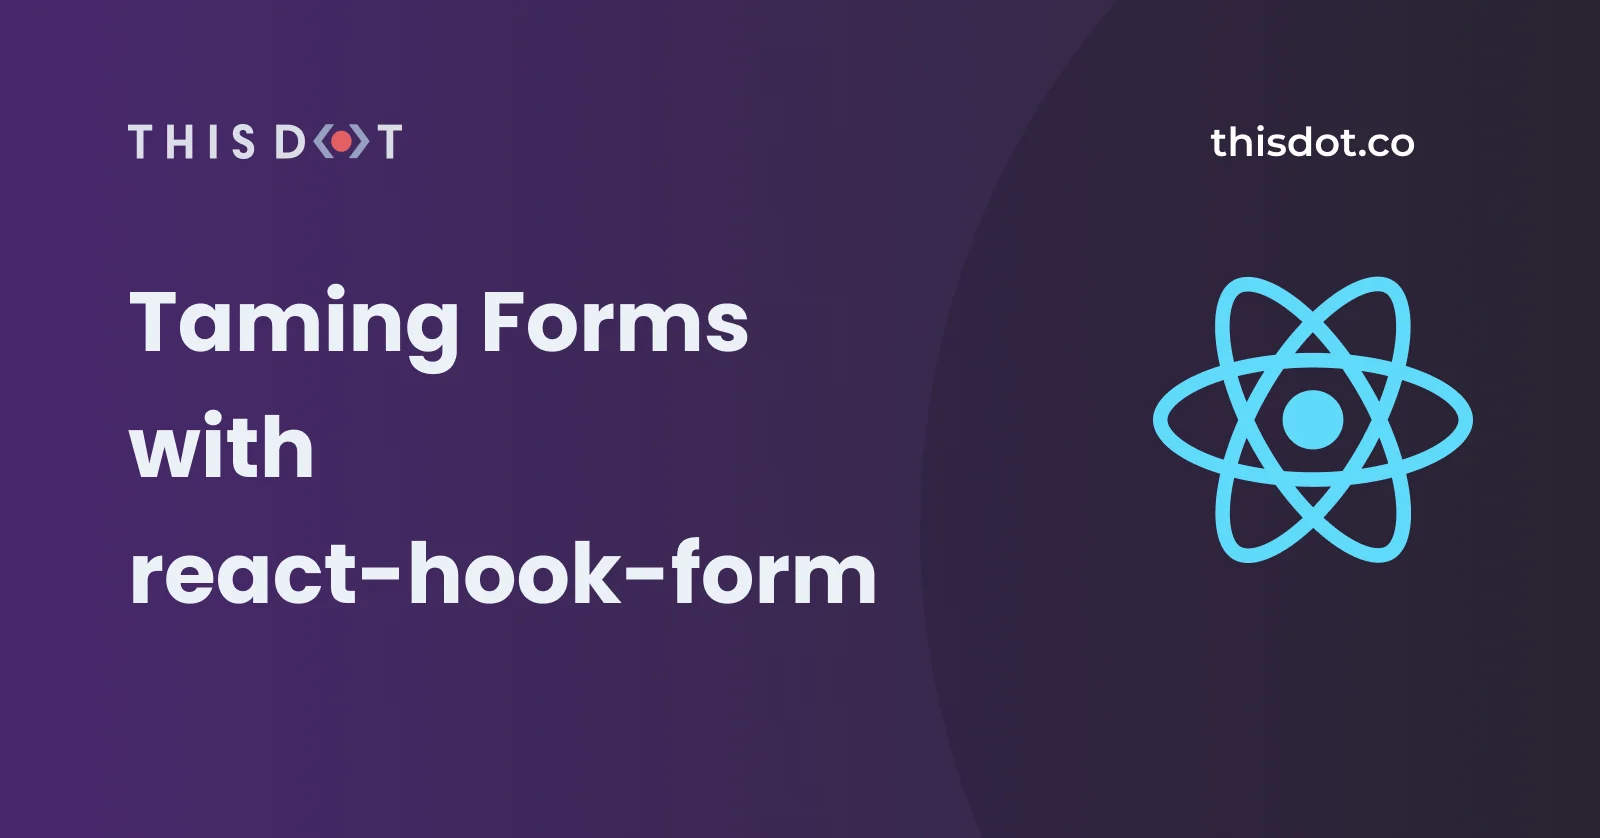 Taming Forms With react-hook-form